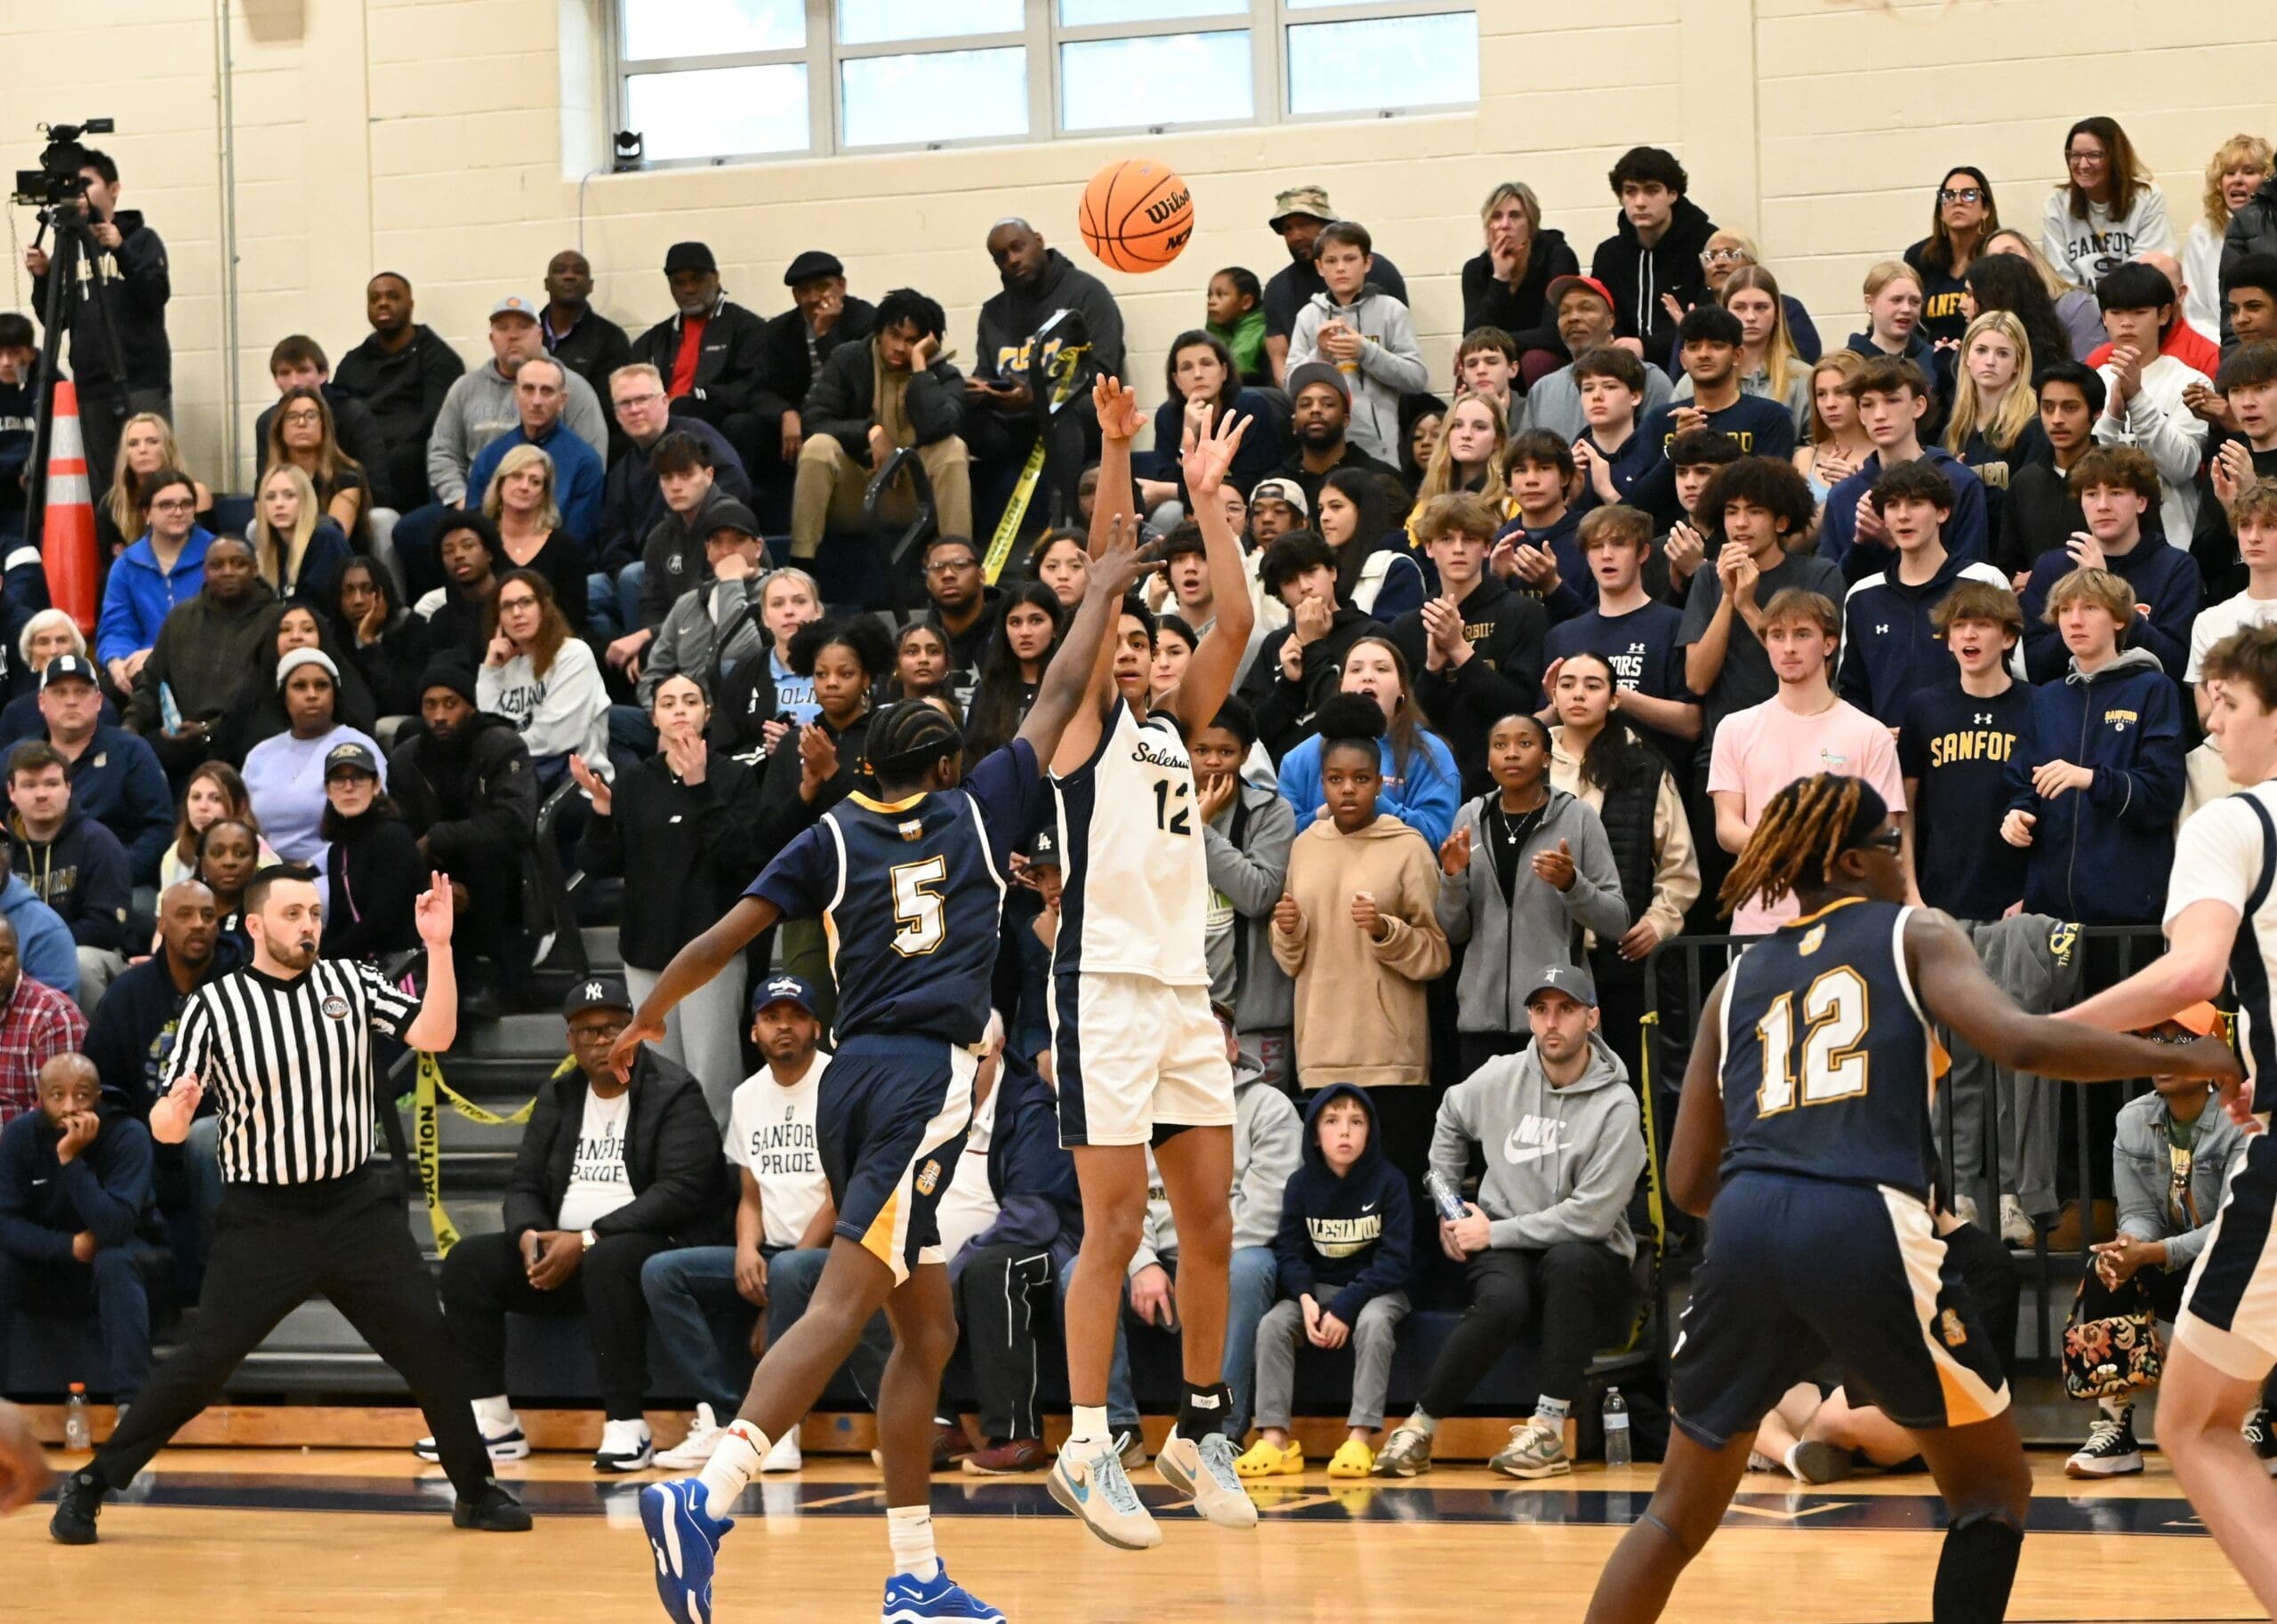 Salesianum boys basketball Justin Hinds attempts a three pointer against Sanford photo courtesy of Nick Halliday scaled